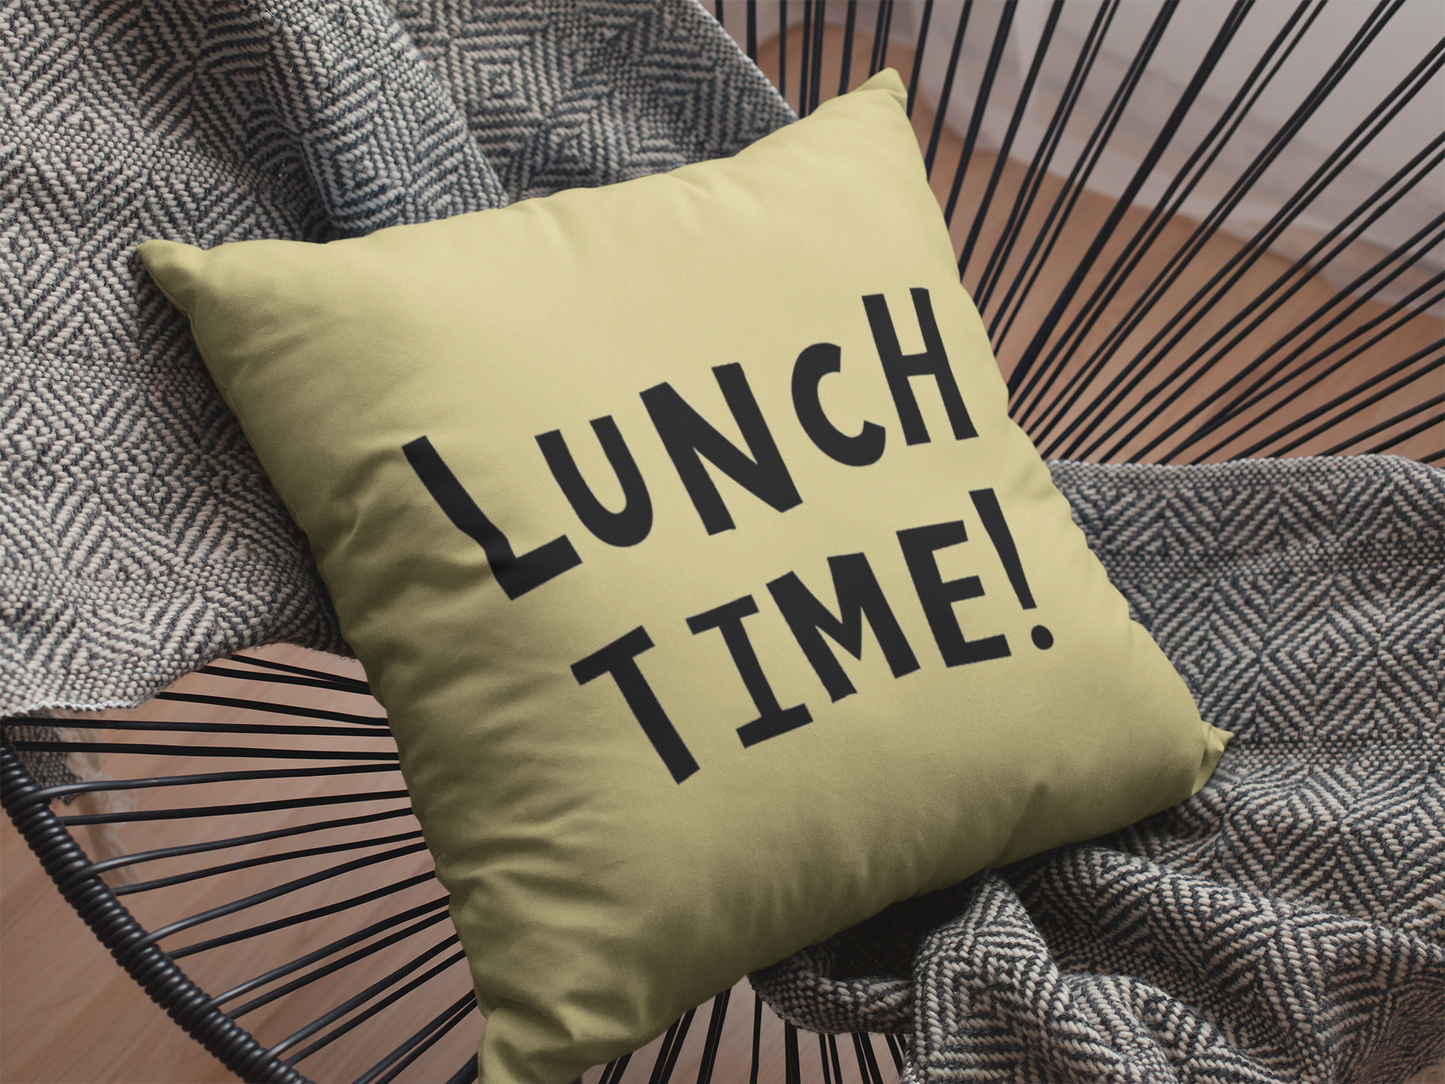 Lunch Time  Printed Cushion